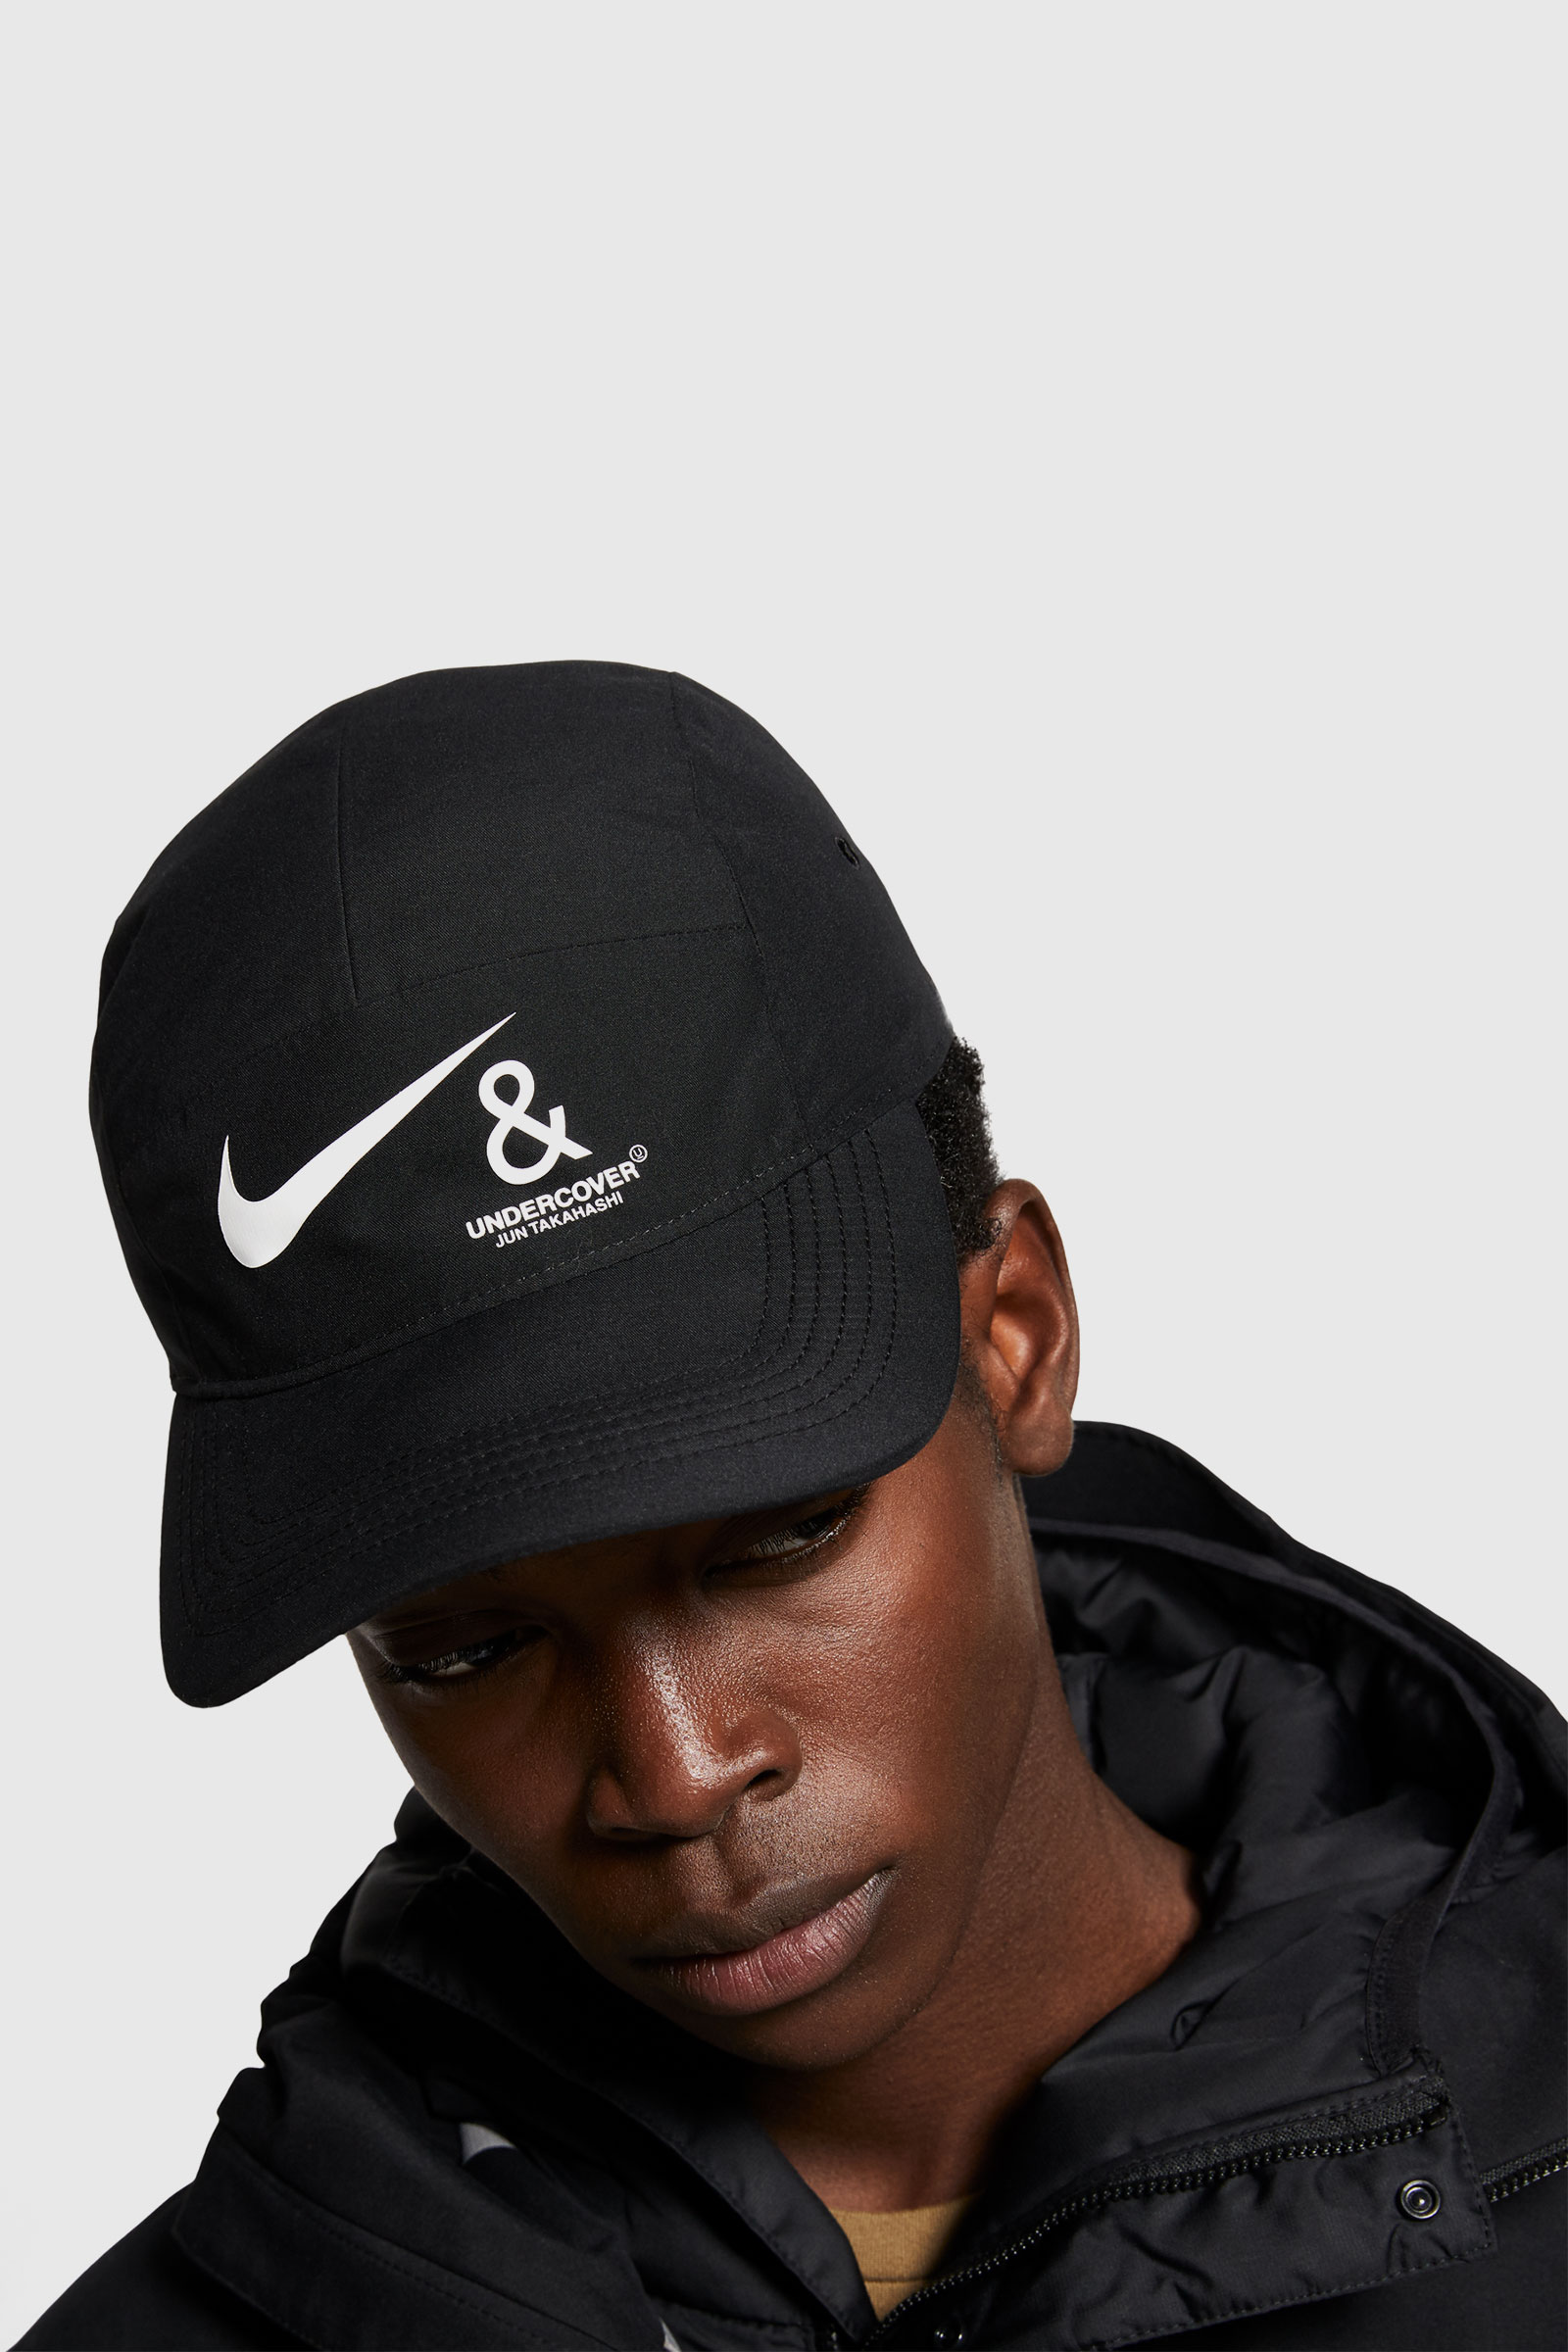 undercover nike hat